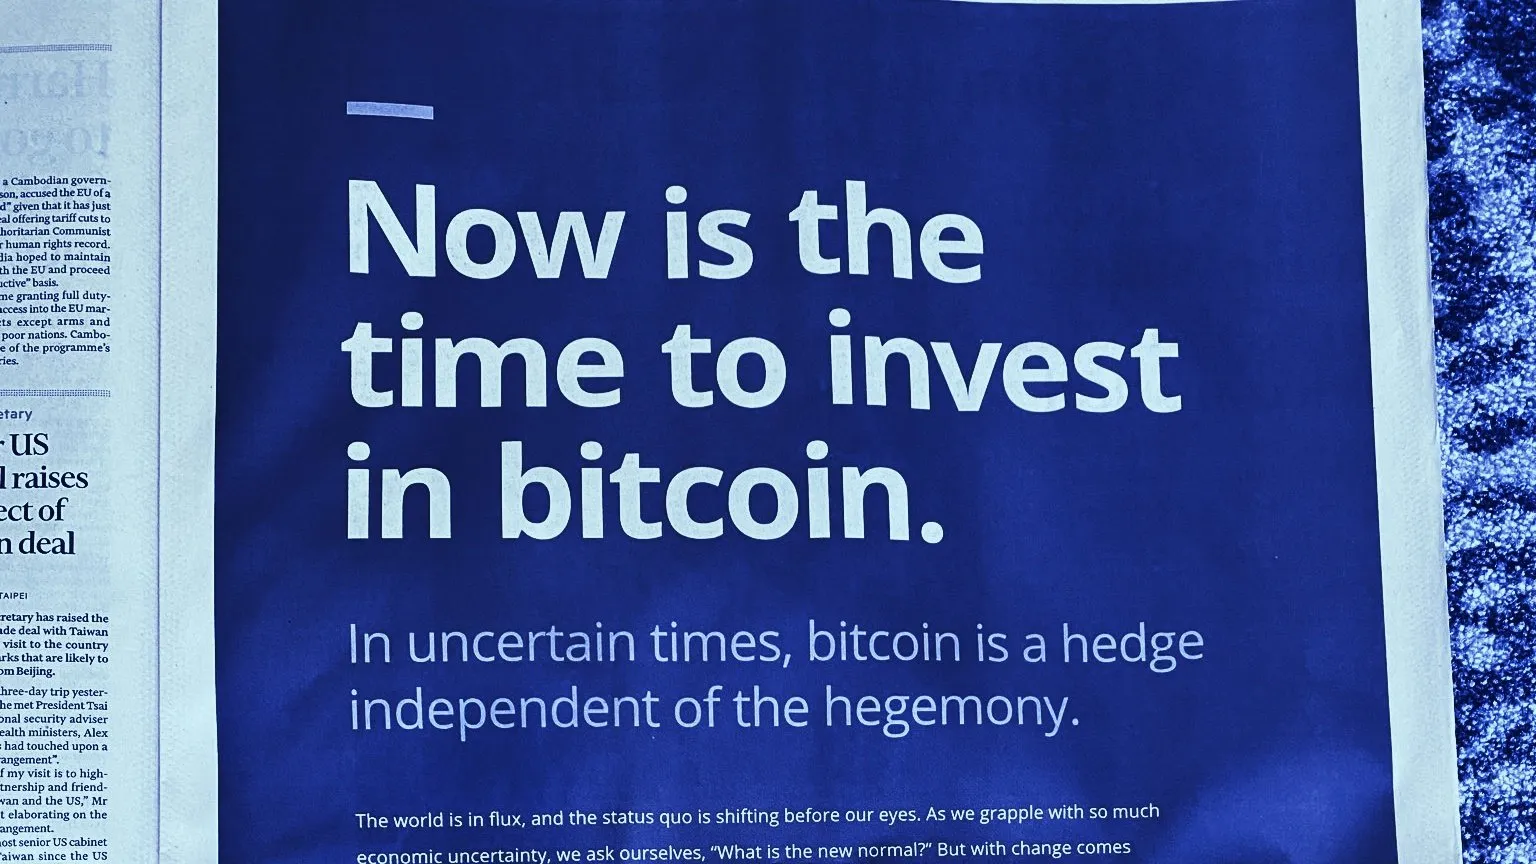 Galaxy Digital's full-page Bitcoin ad in the FT. Image: Twitter